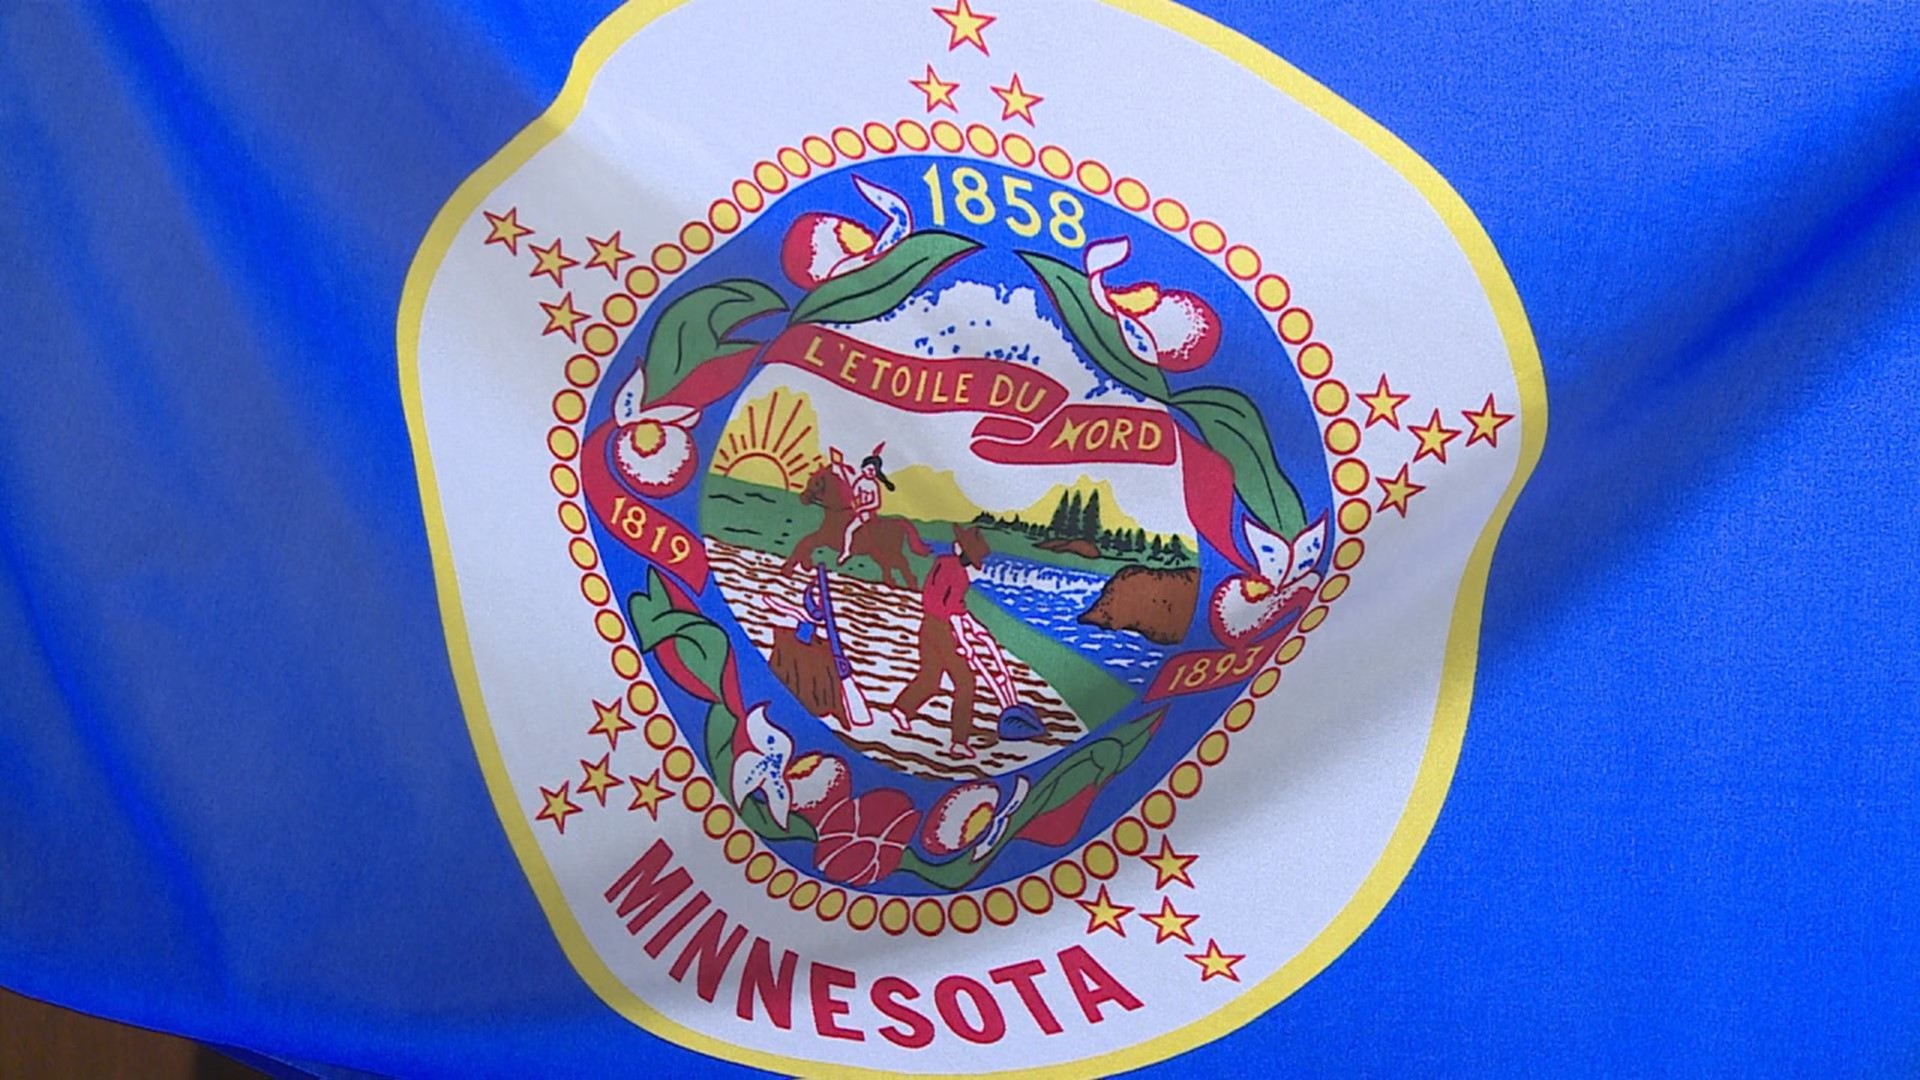 Here's why Minnesota is getting a new state flag and seal